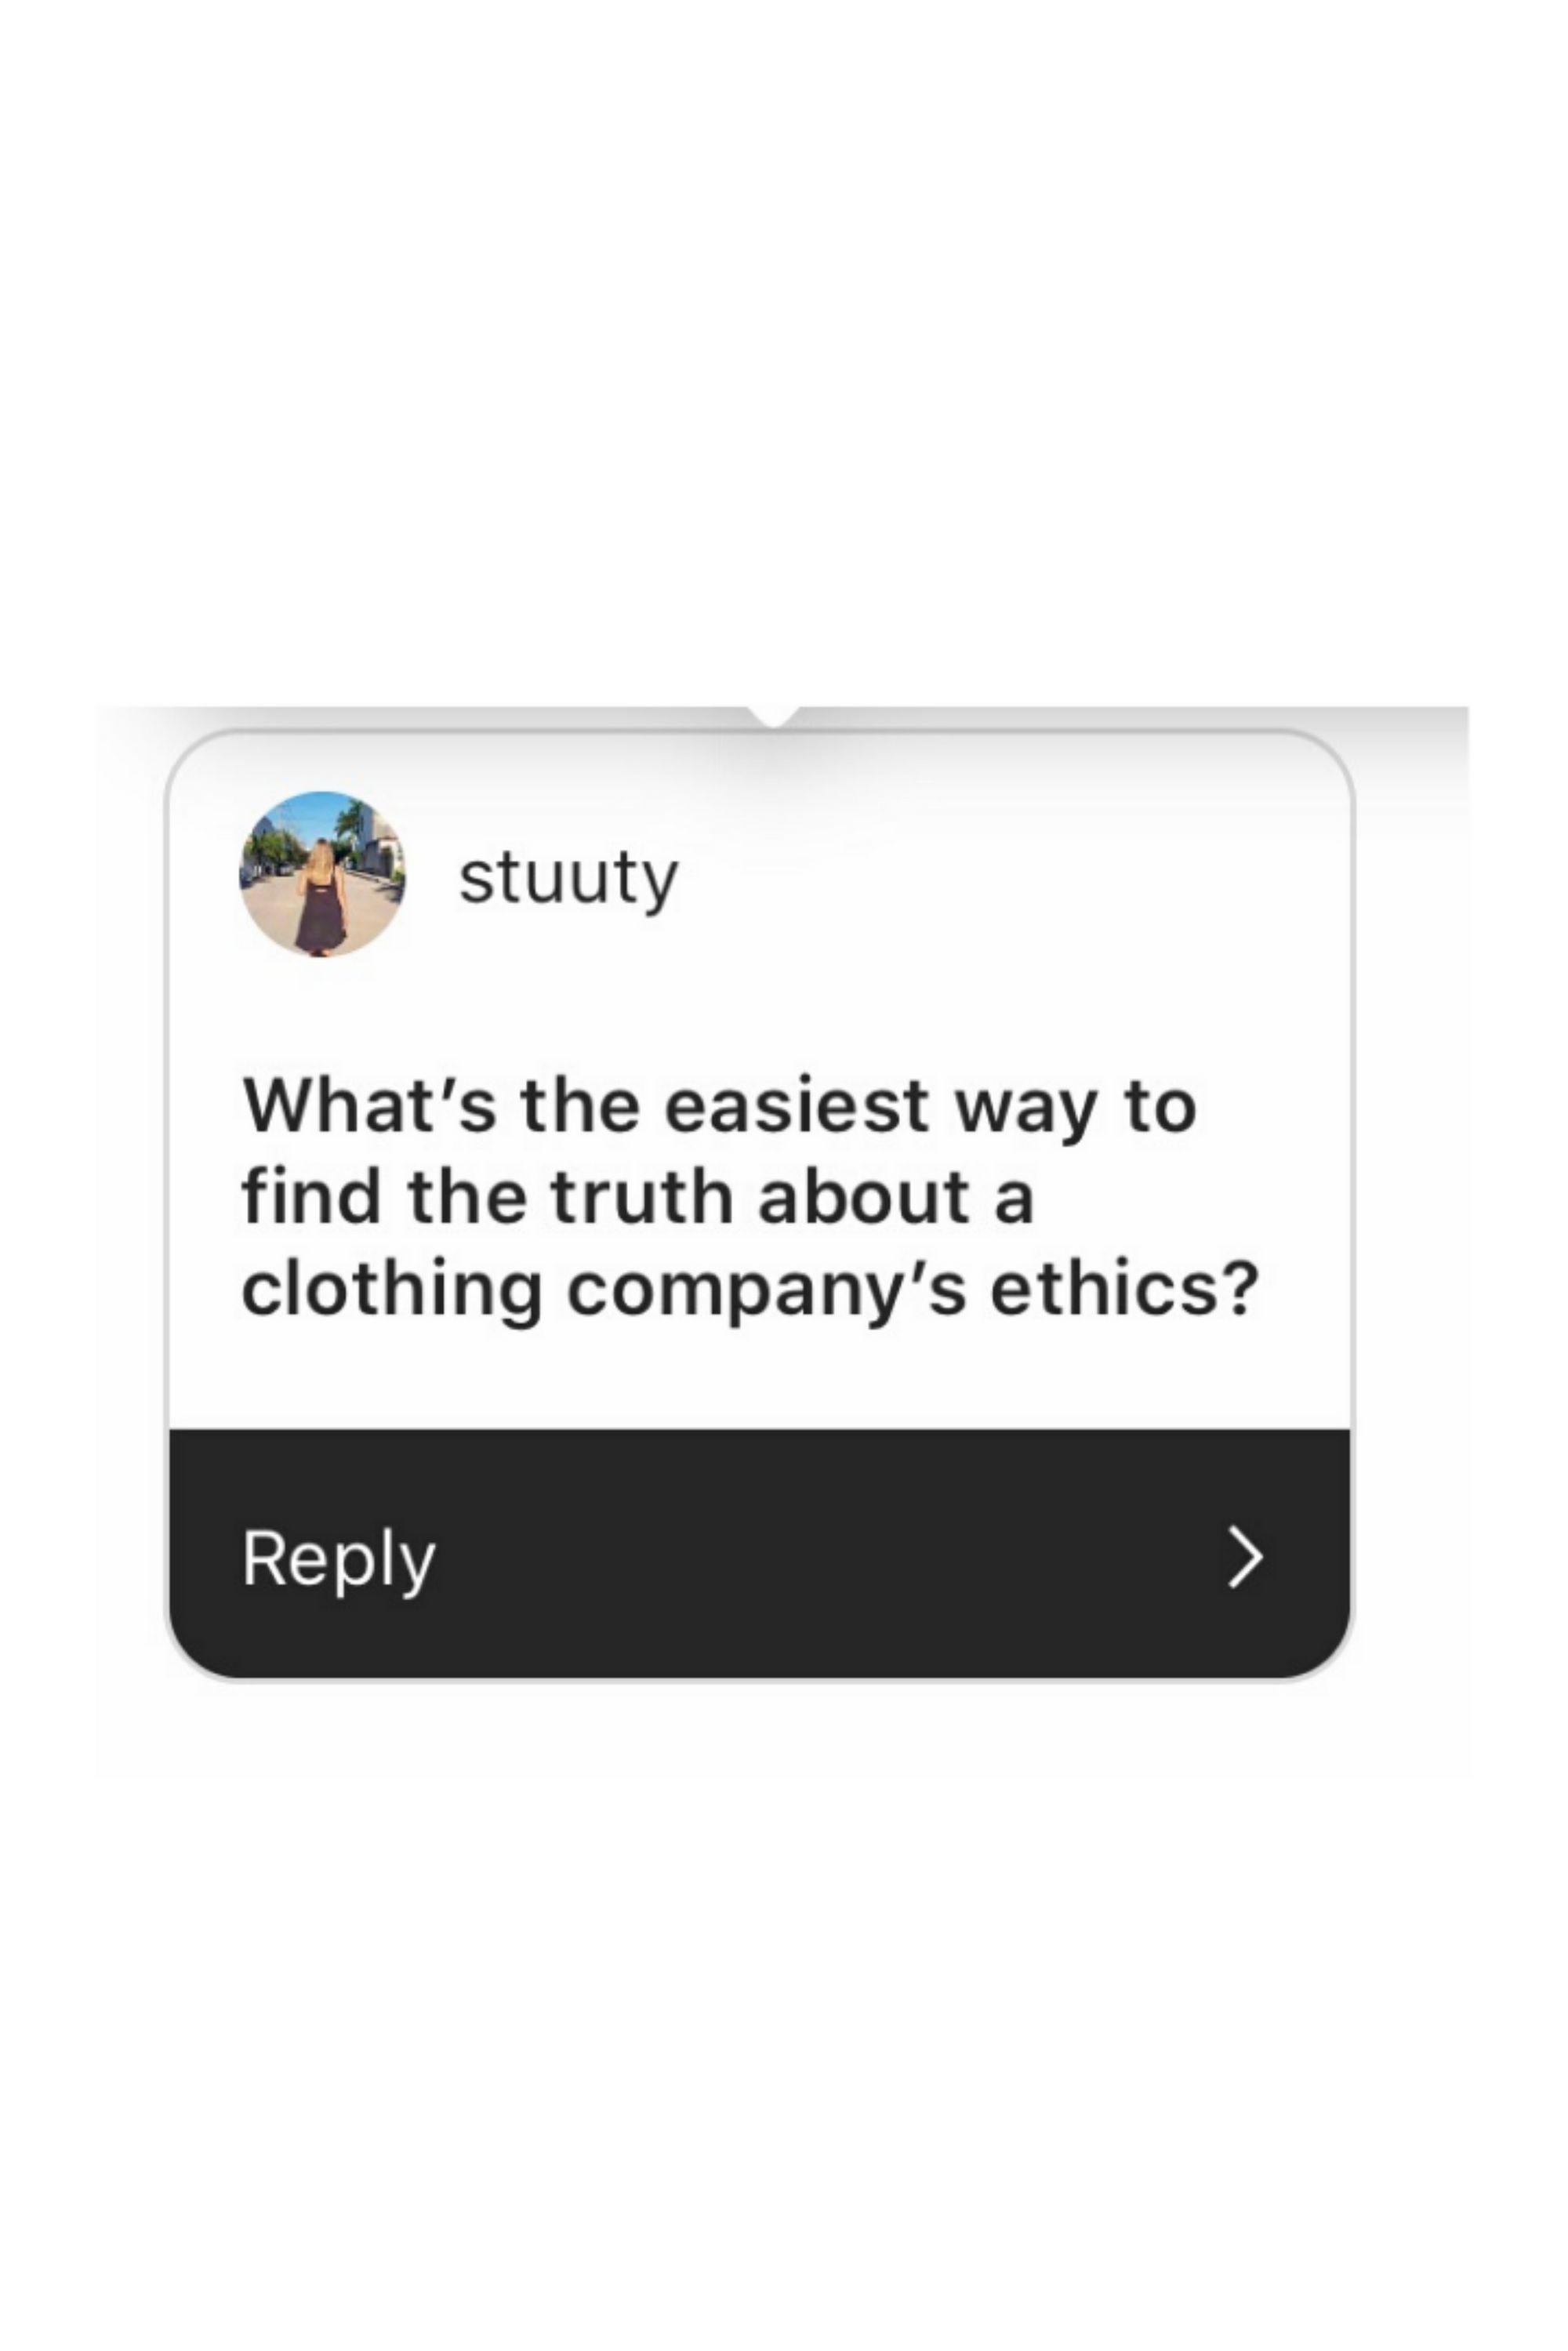 How do you know if a clothing company is ethical?